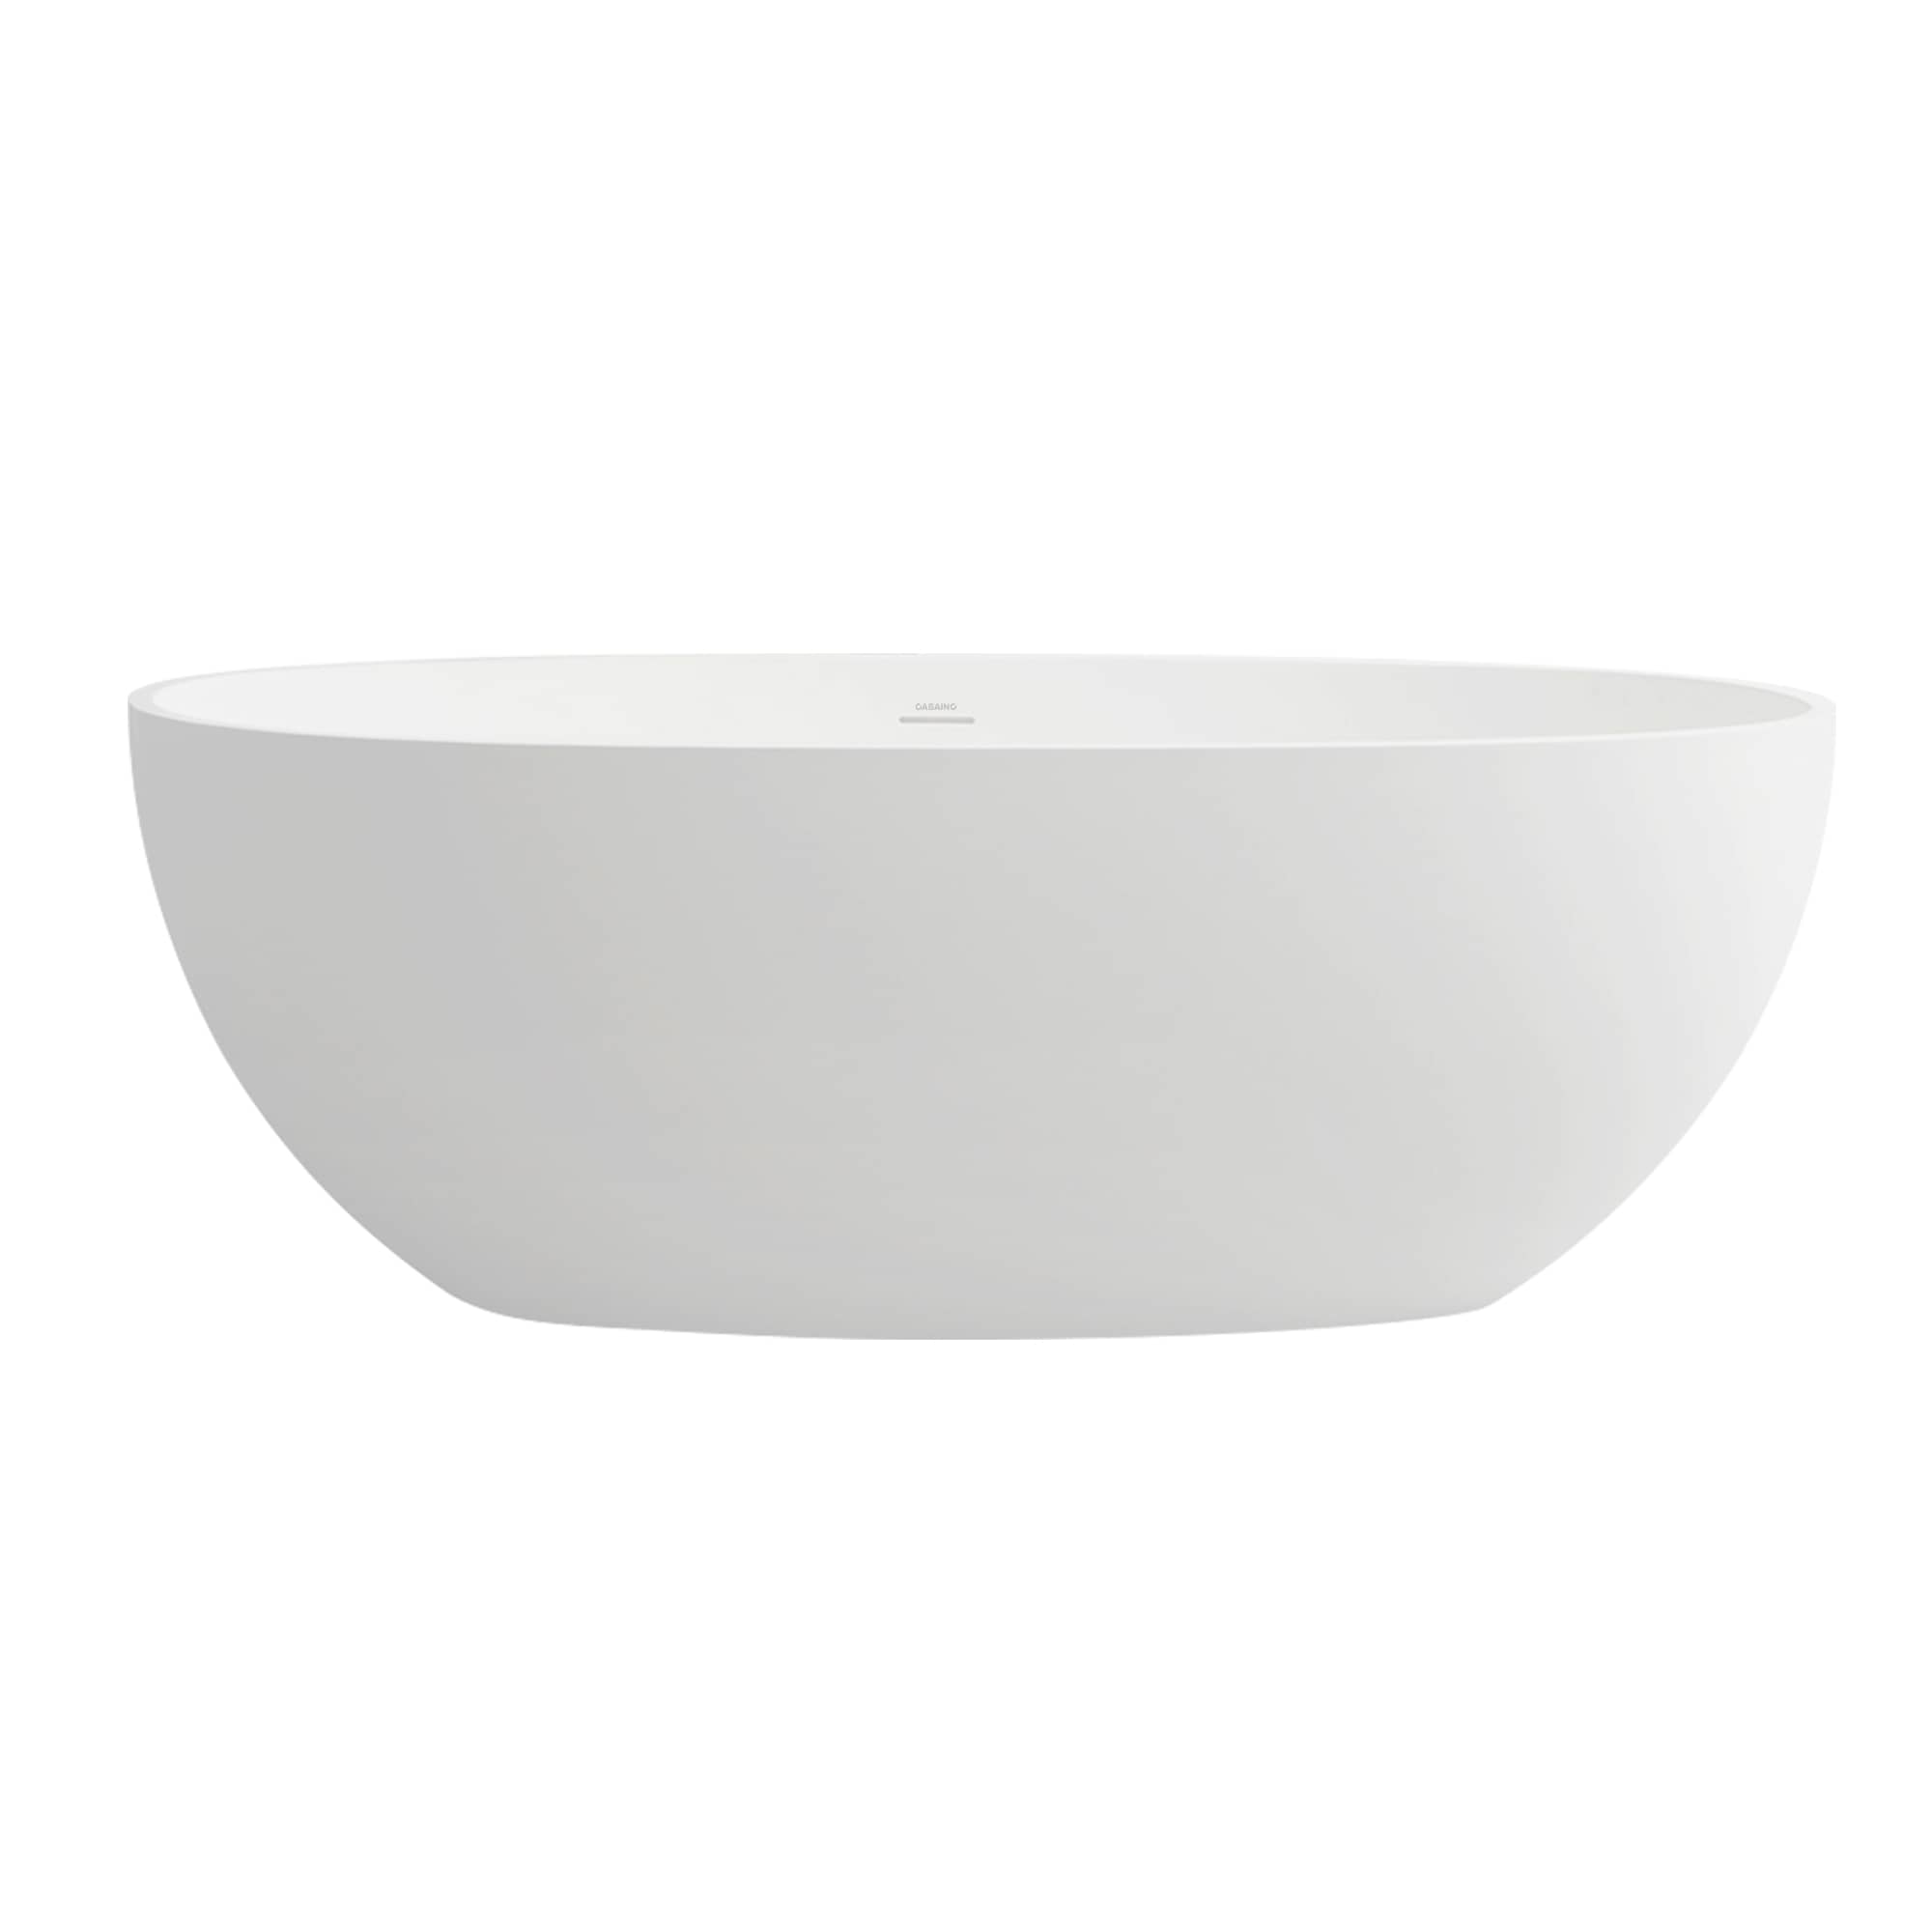 CASAINC 61 in. Solid Surface Free-Standing Bathtub with Centre Drain in Matte White